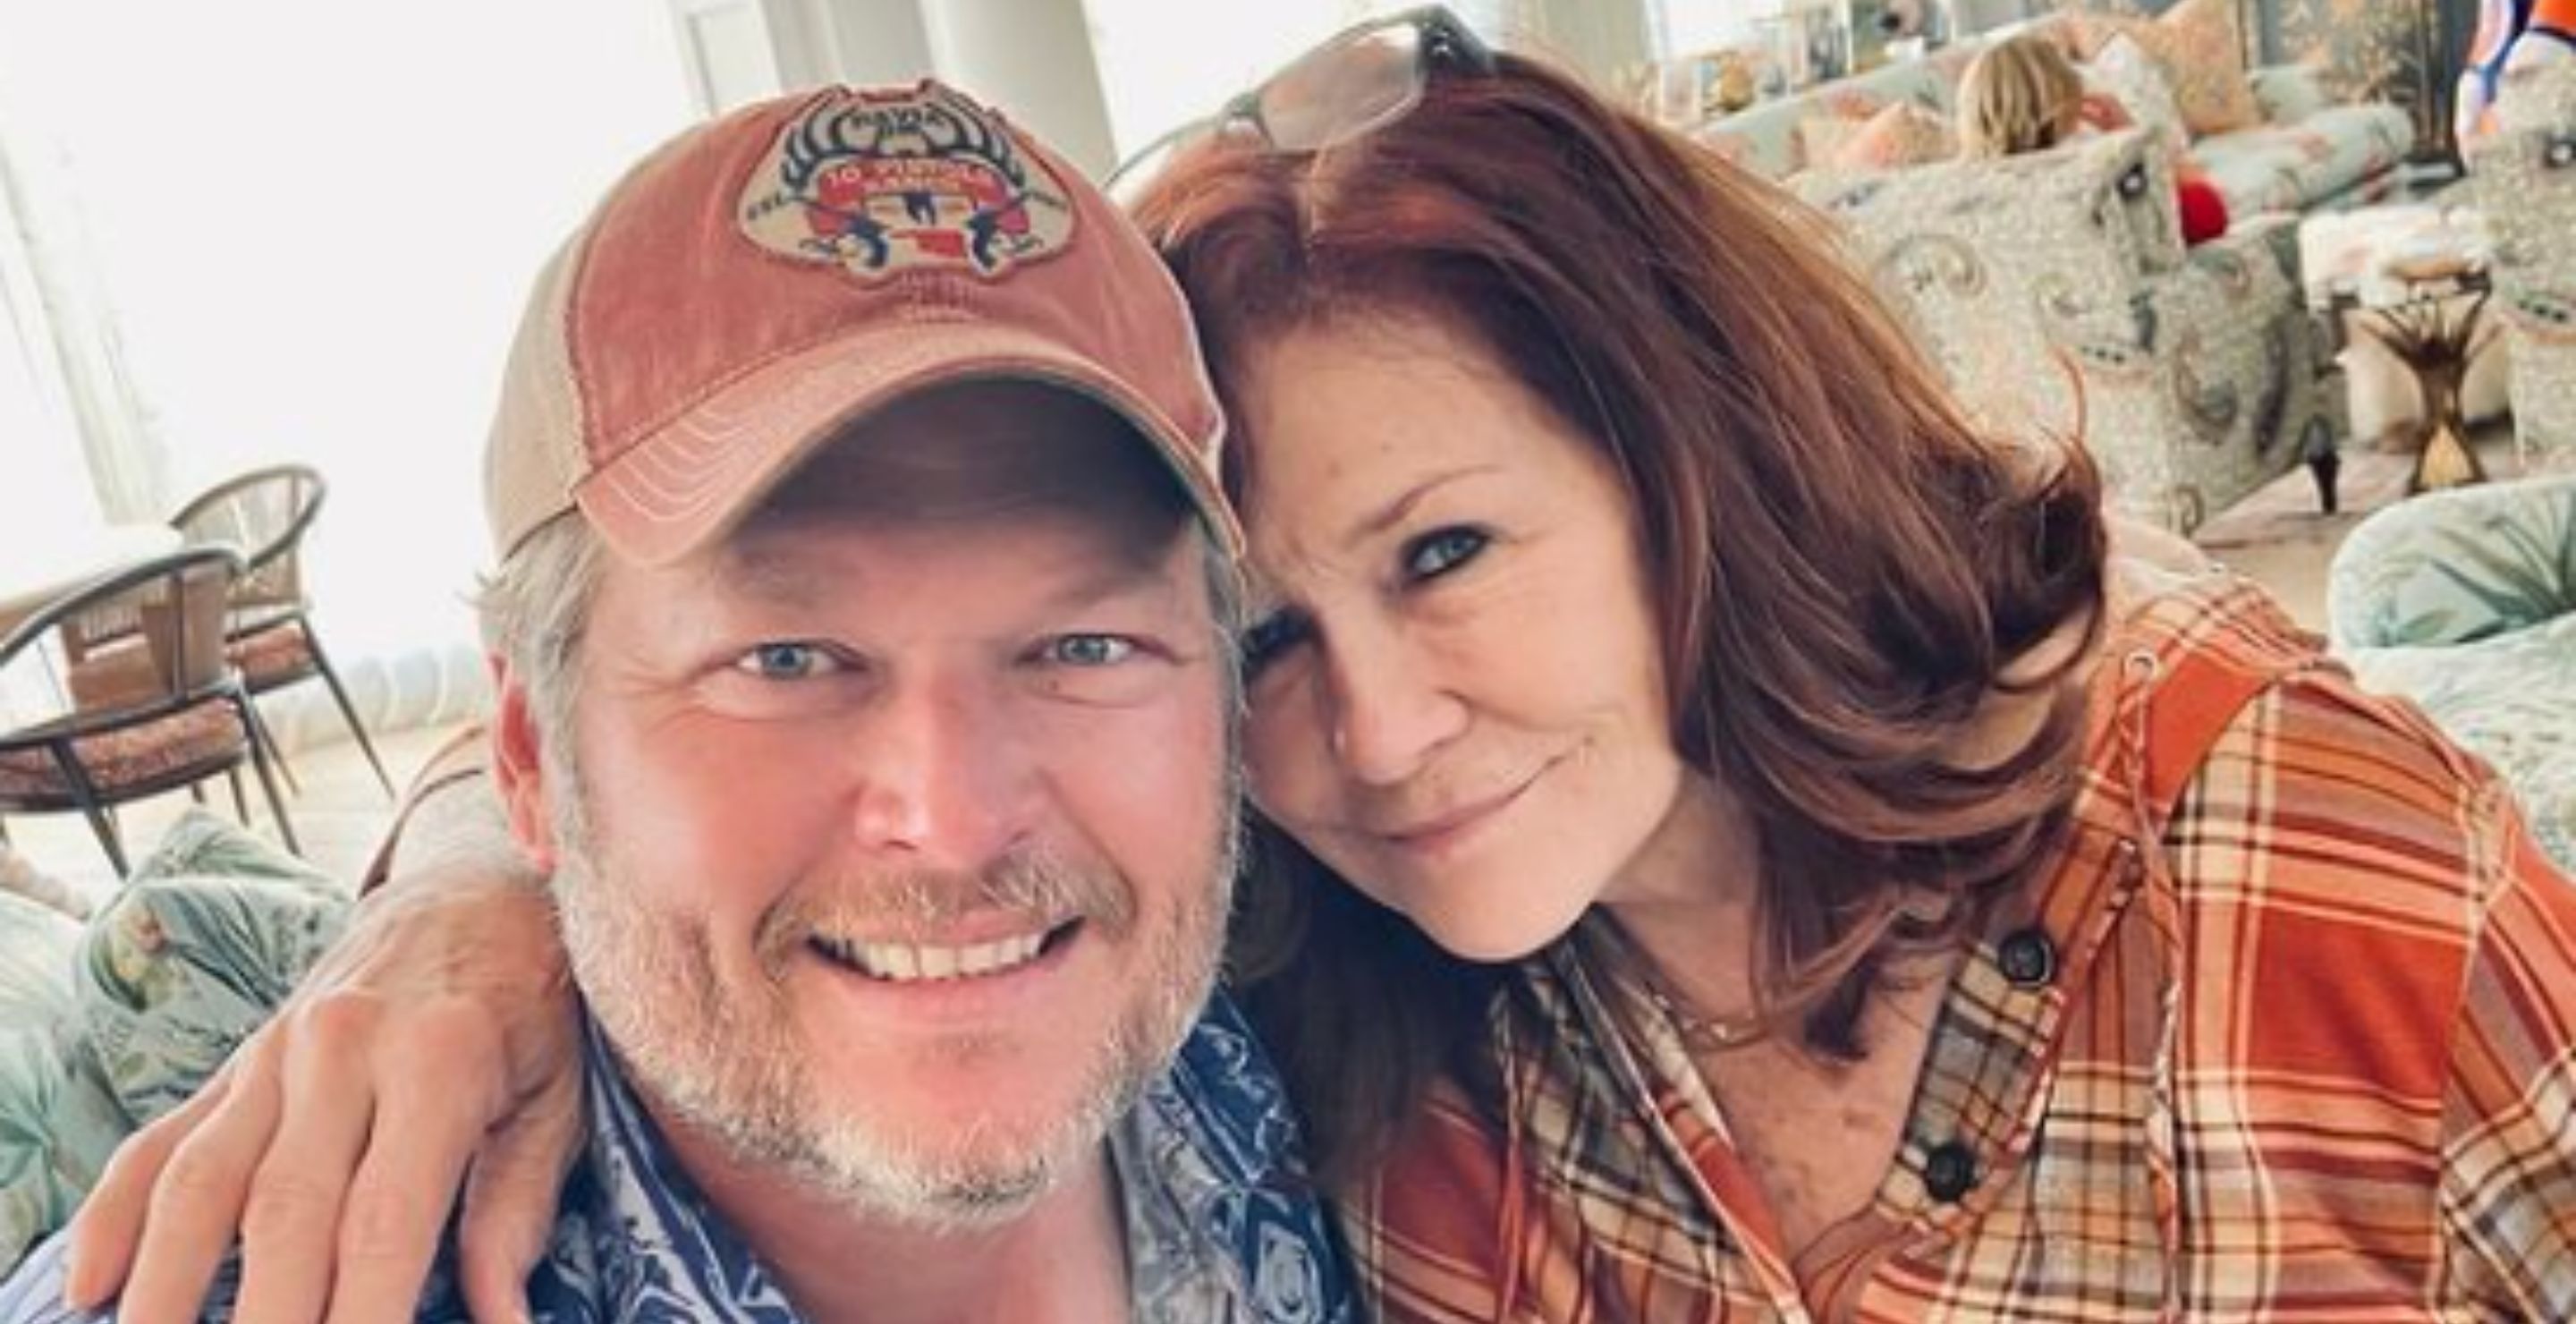 Blake Shelton's Mother Is An Ageless Wonder 'His Mother Looks Younger Than He Does'